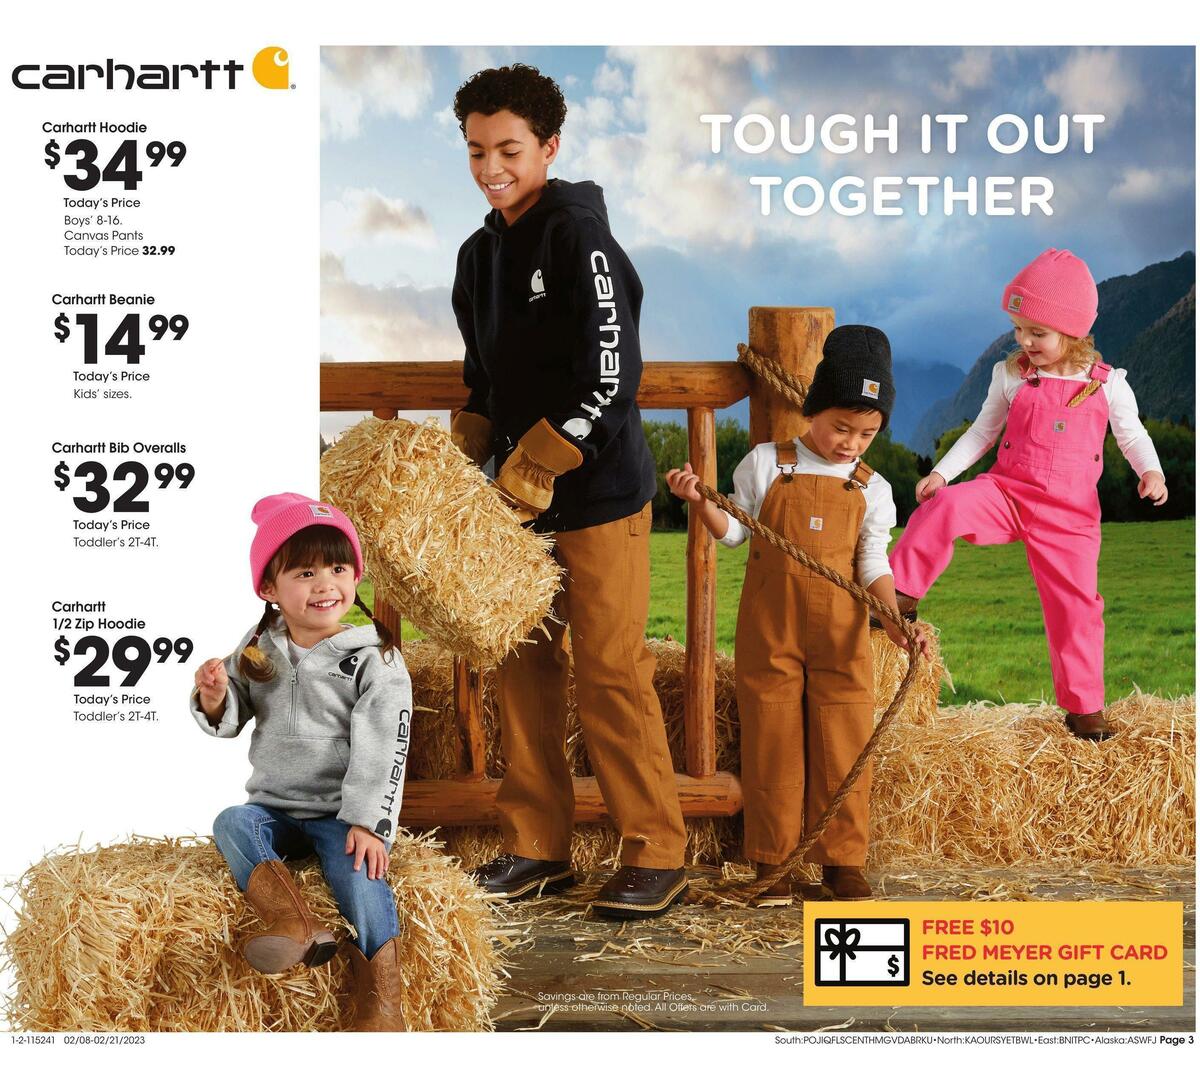 Fred Meyer Carhartt Apparel Weekly Ad from February 8